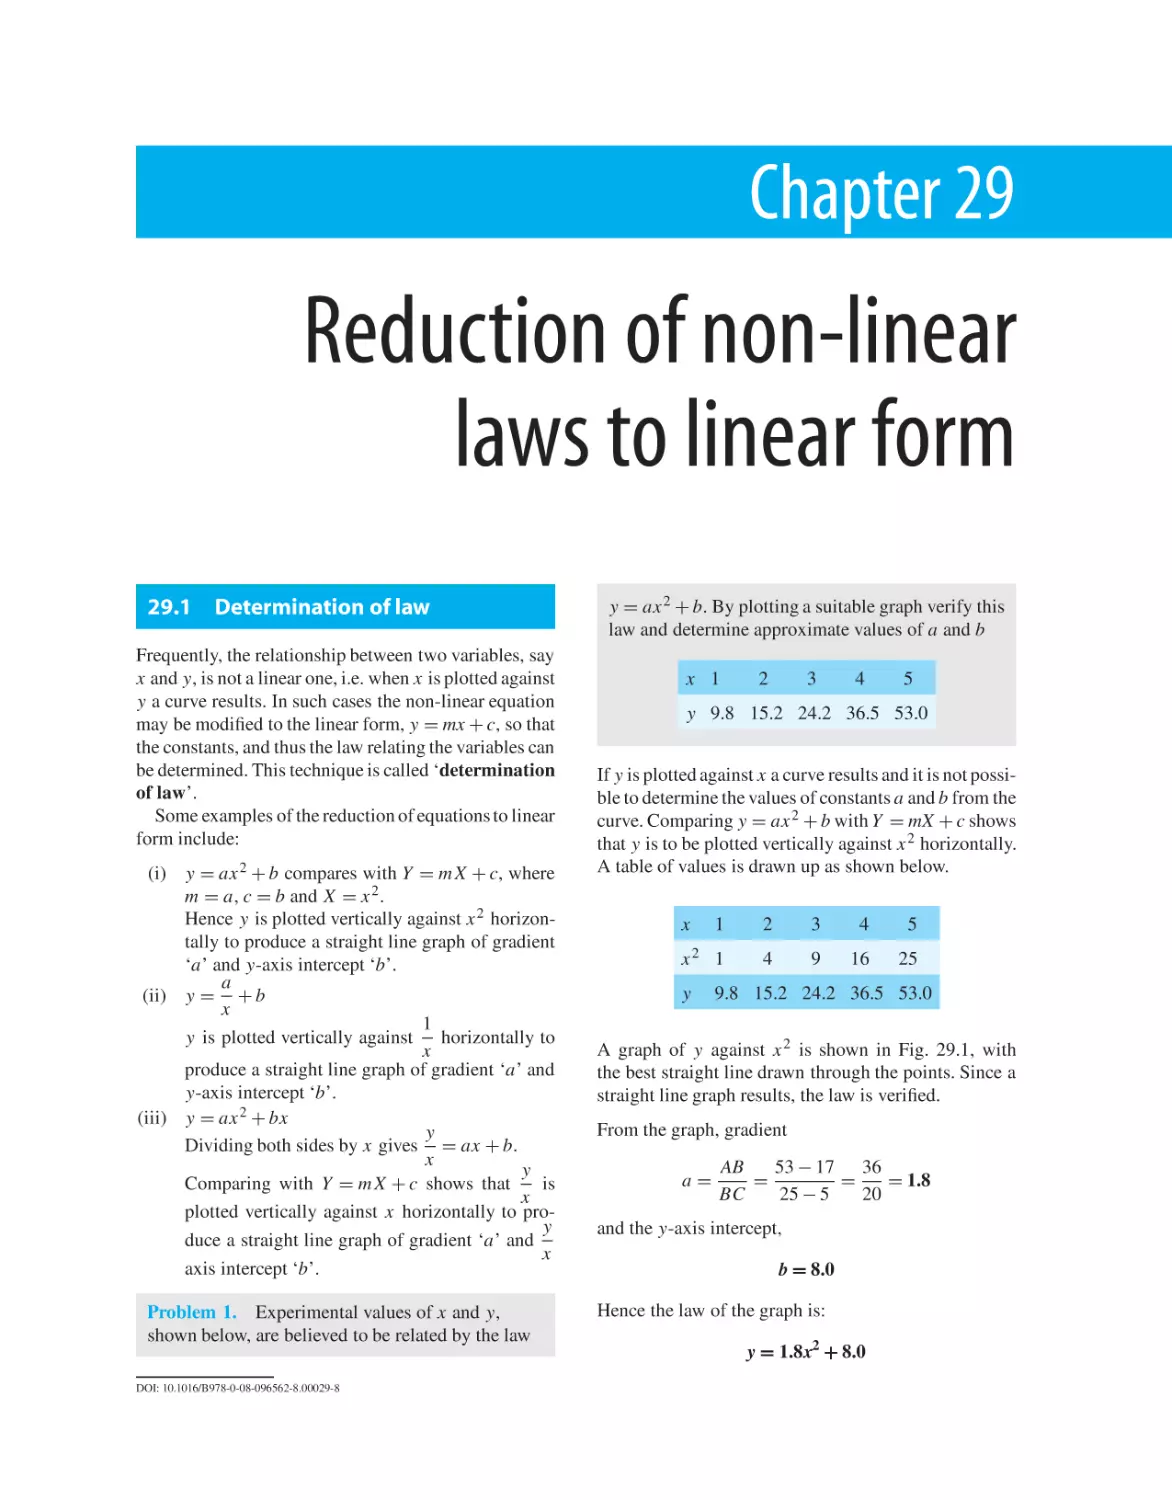 Chapter 29. Reduction of non-linear laws to linear form
29.1 Determination of law